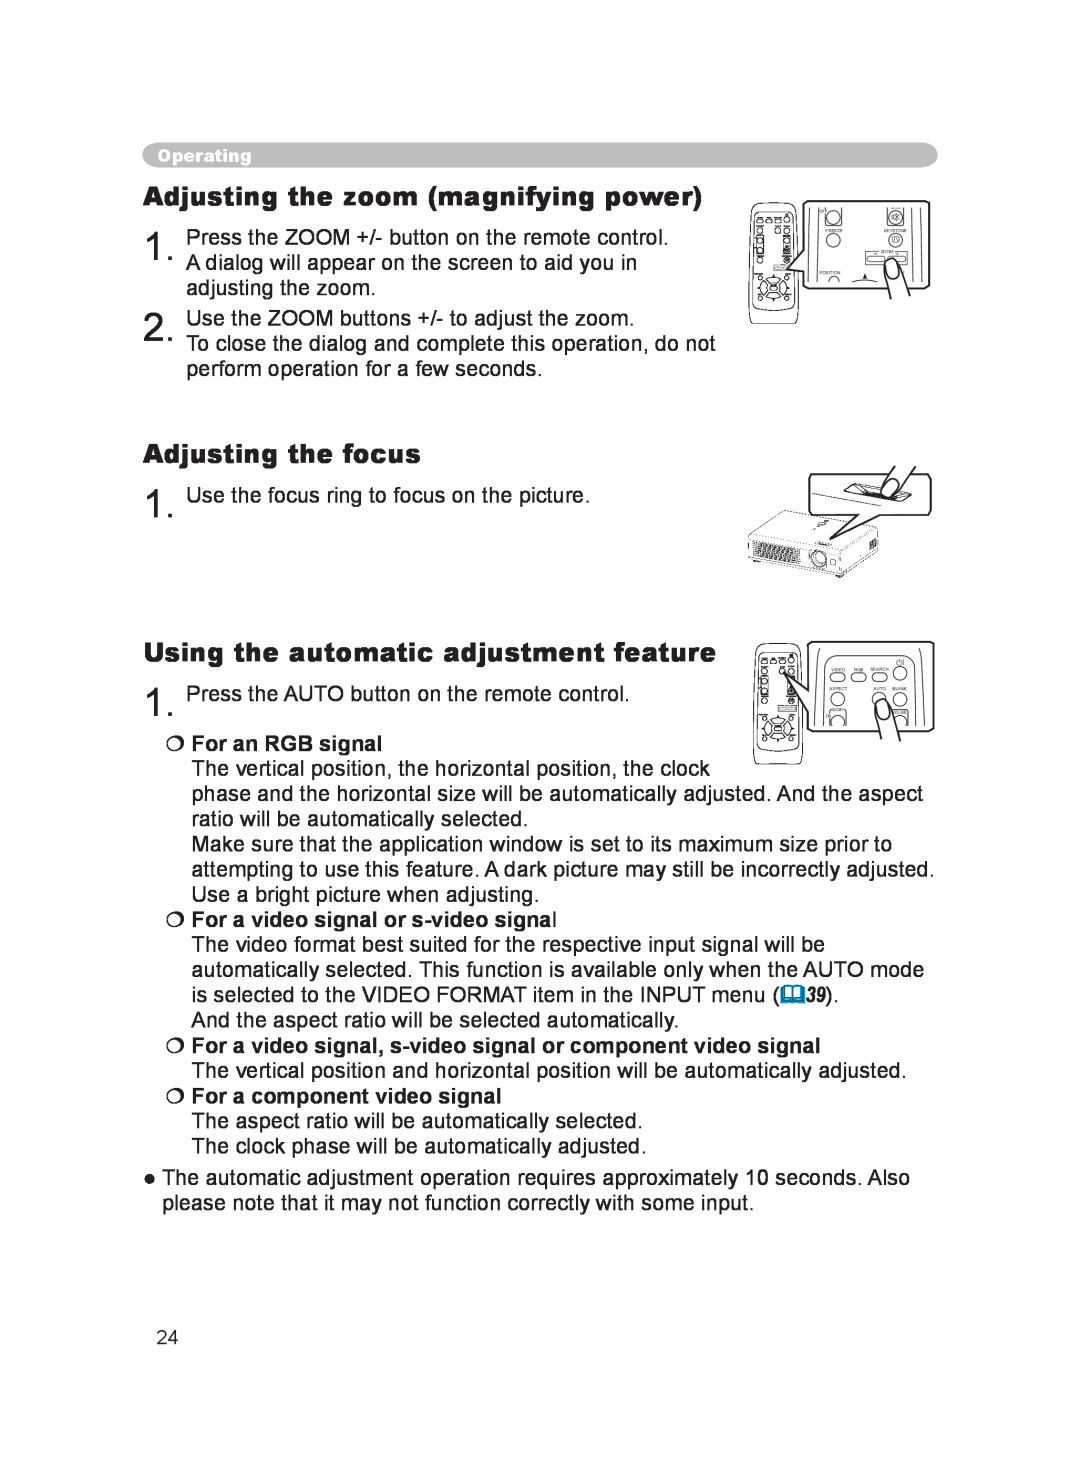 Hitachi PJ-LC9 user manual Adjusting the zoom magnifying power, Adjusting the focus, Using the automatic adjustment feature 